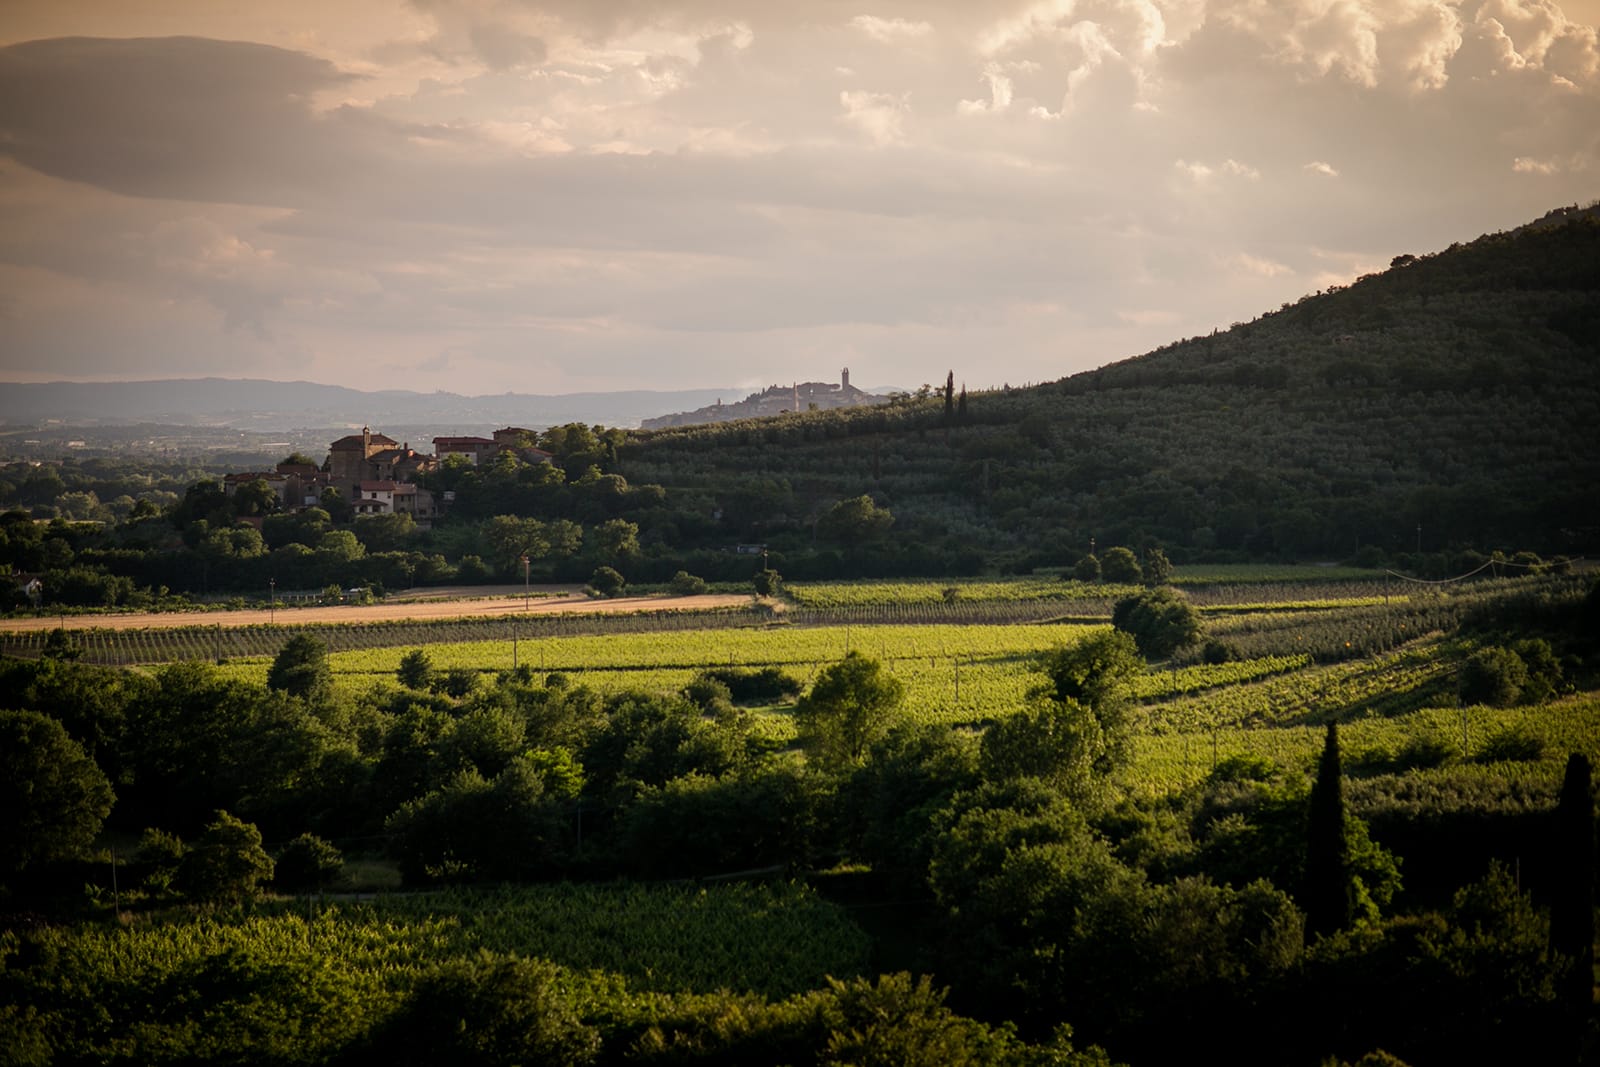 Farm Le Capanne. Images of the agricultural holding between Castiglion Fiorentino and Cortona